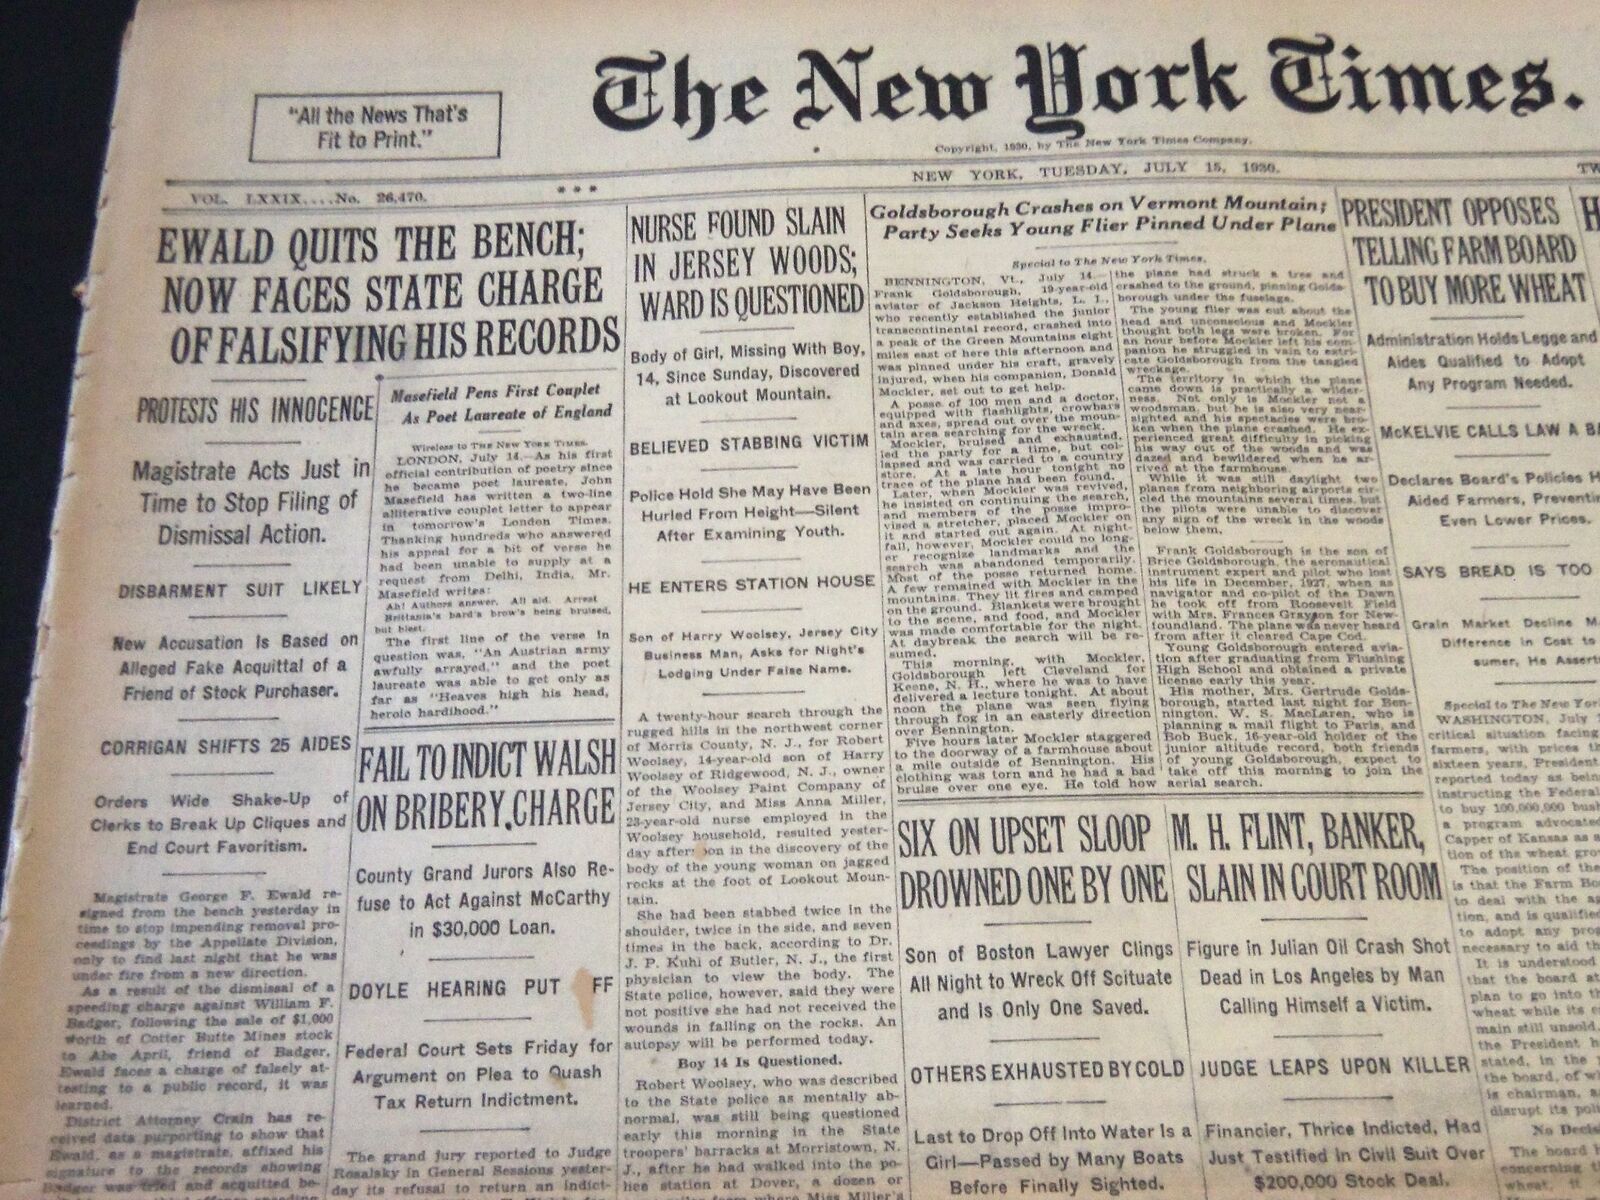 1930 JULY 15 NEW YORK TIMES - EWALD QUITS THE BENCH - NT 5738